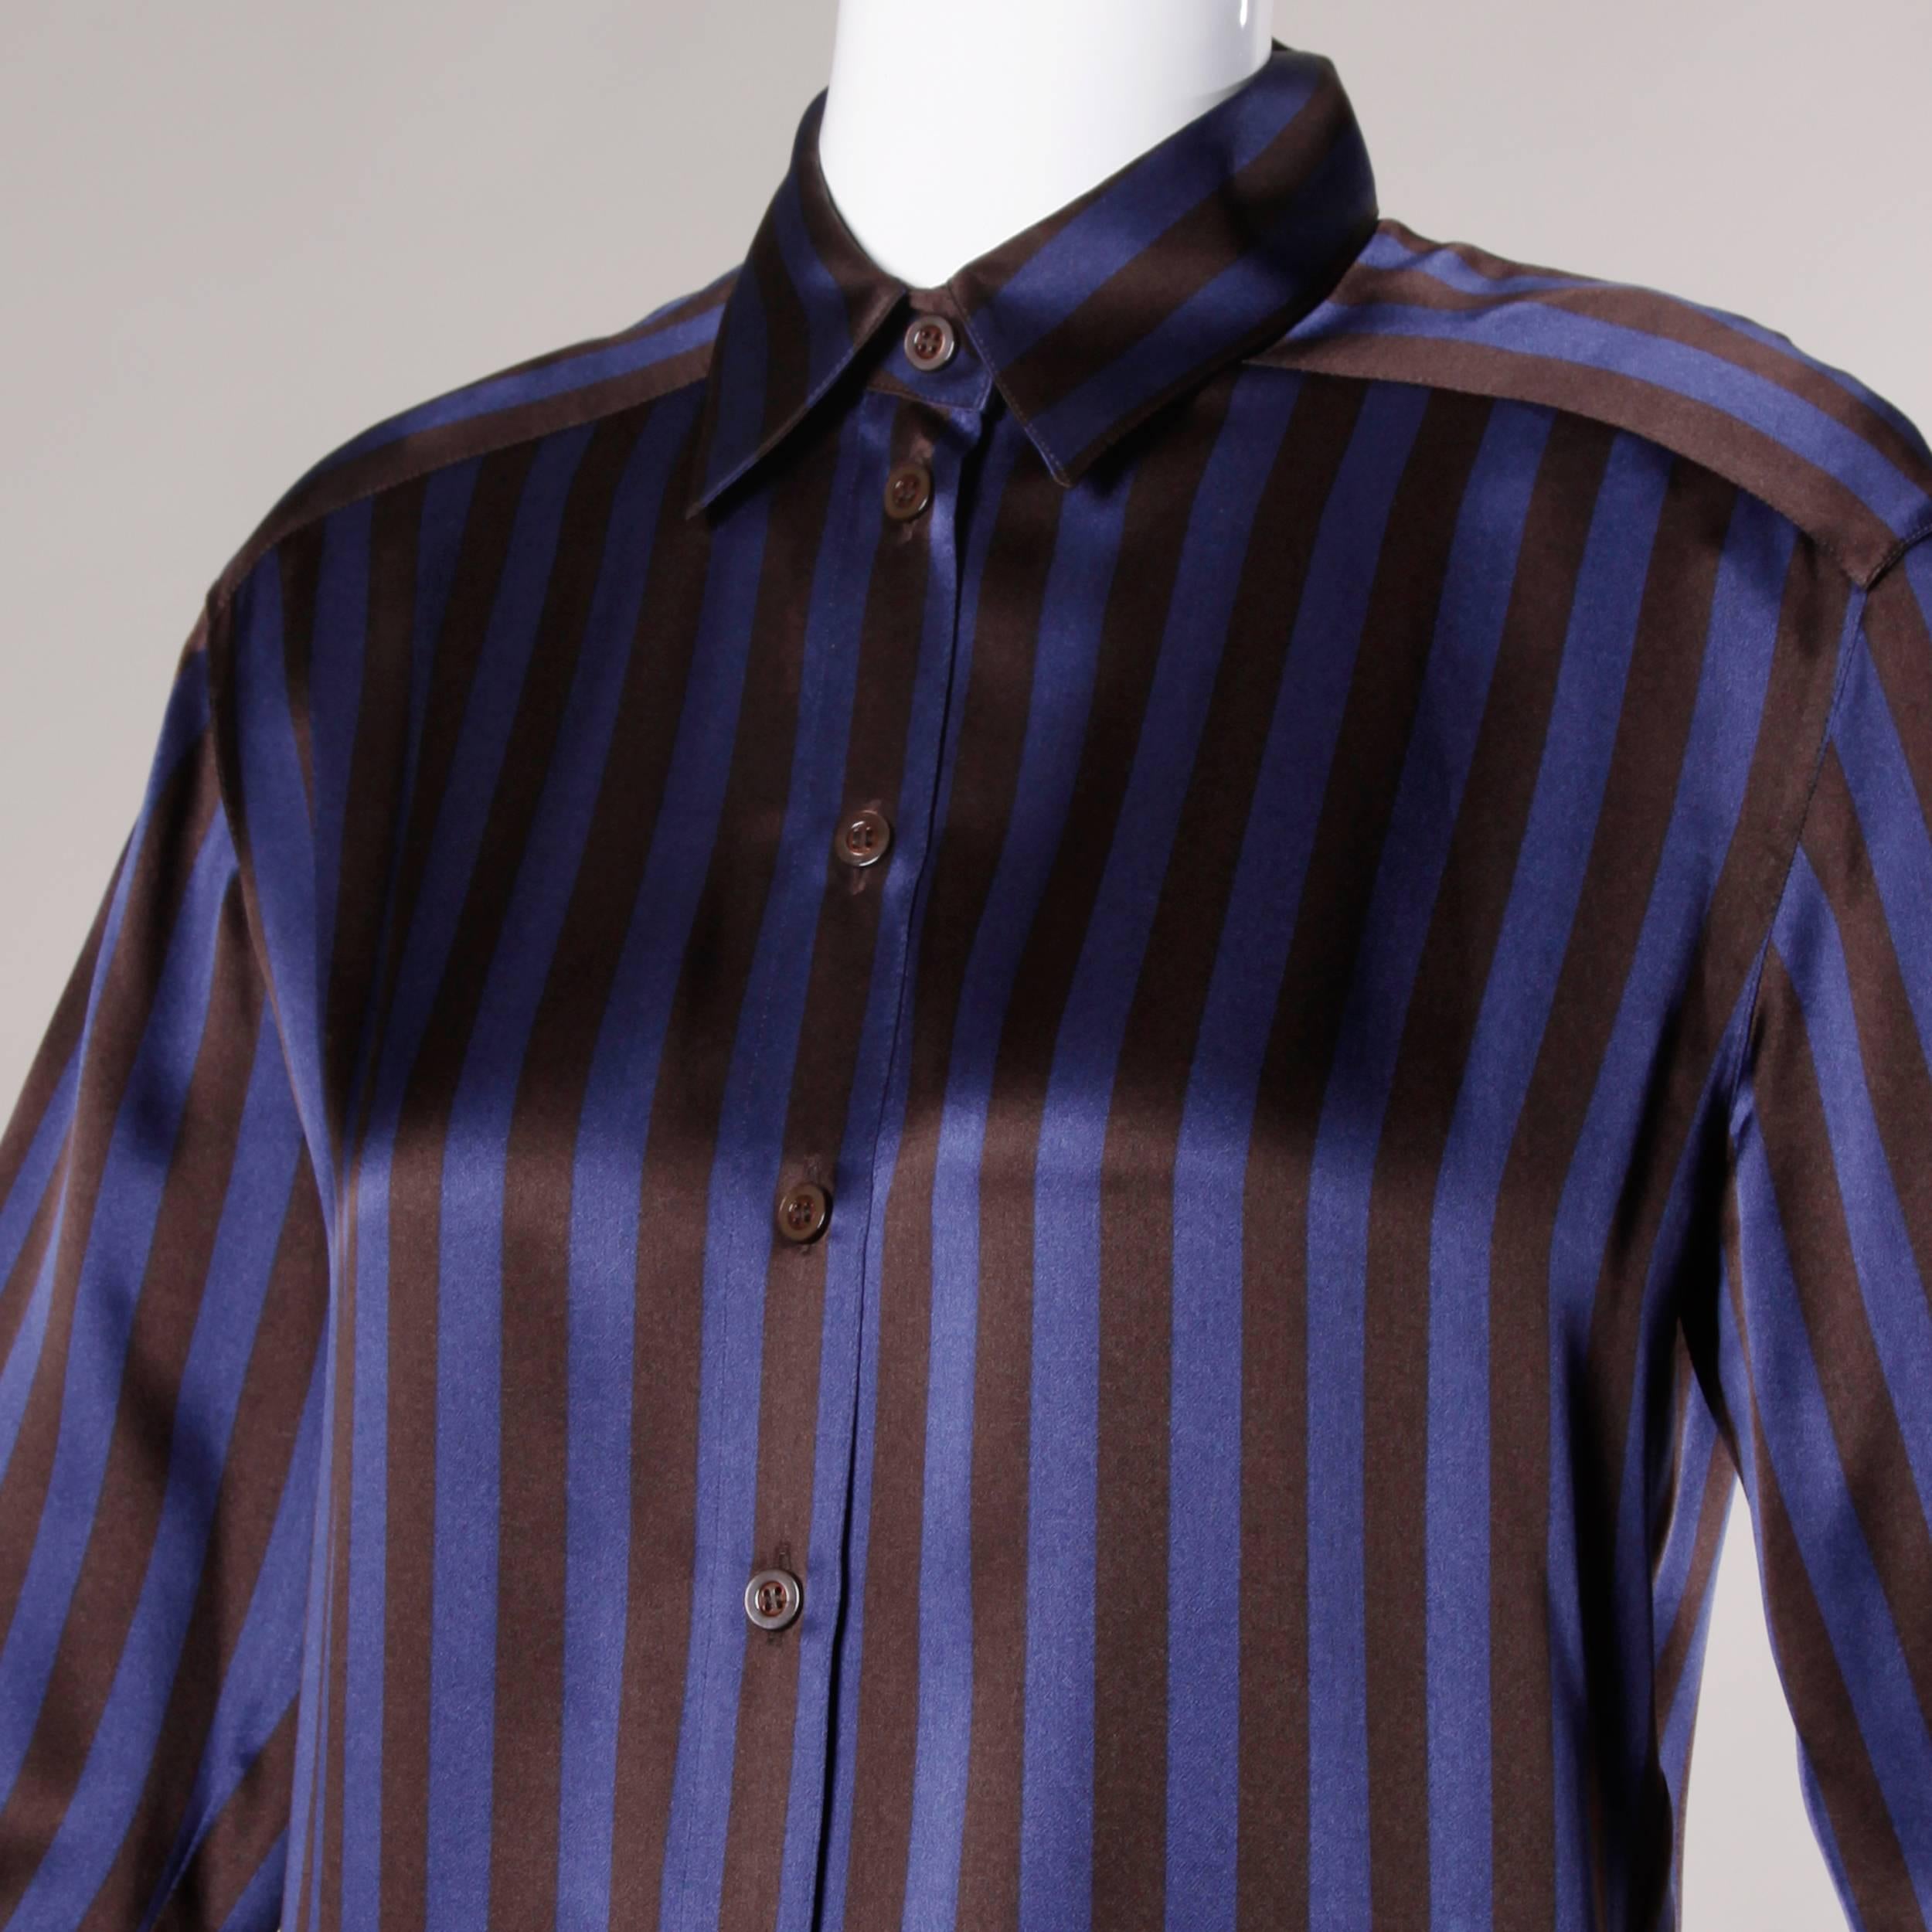 Brown and blue striped silk button up blouse by Margaretha Ley for Escada.

Details:

Unlined
Shoulder Pads Can Easily Be Removed If Desired
Front Button and Wrist Button Closure
Marked Size: 34
Estimated Size: Medium
Color: Royal Blue/